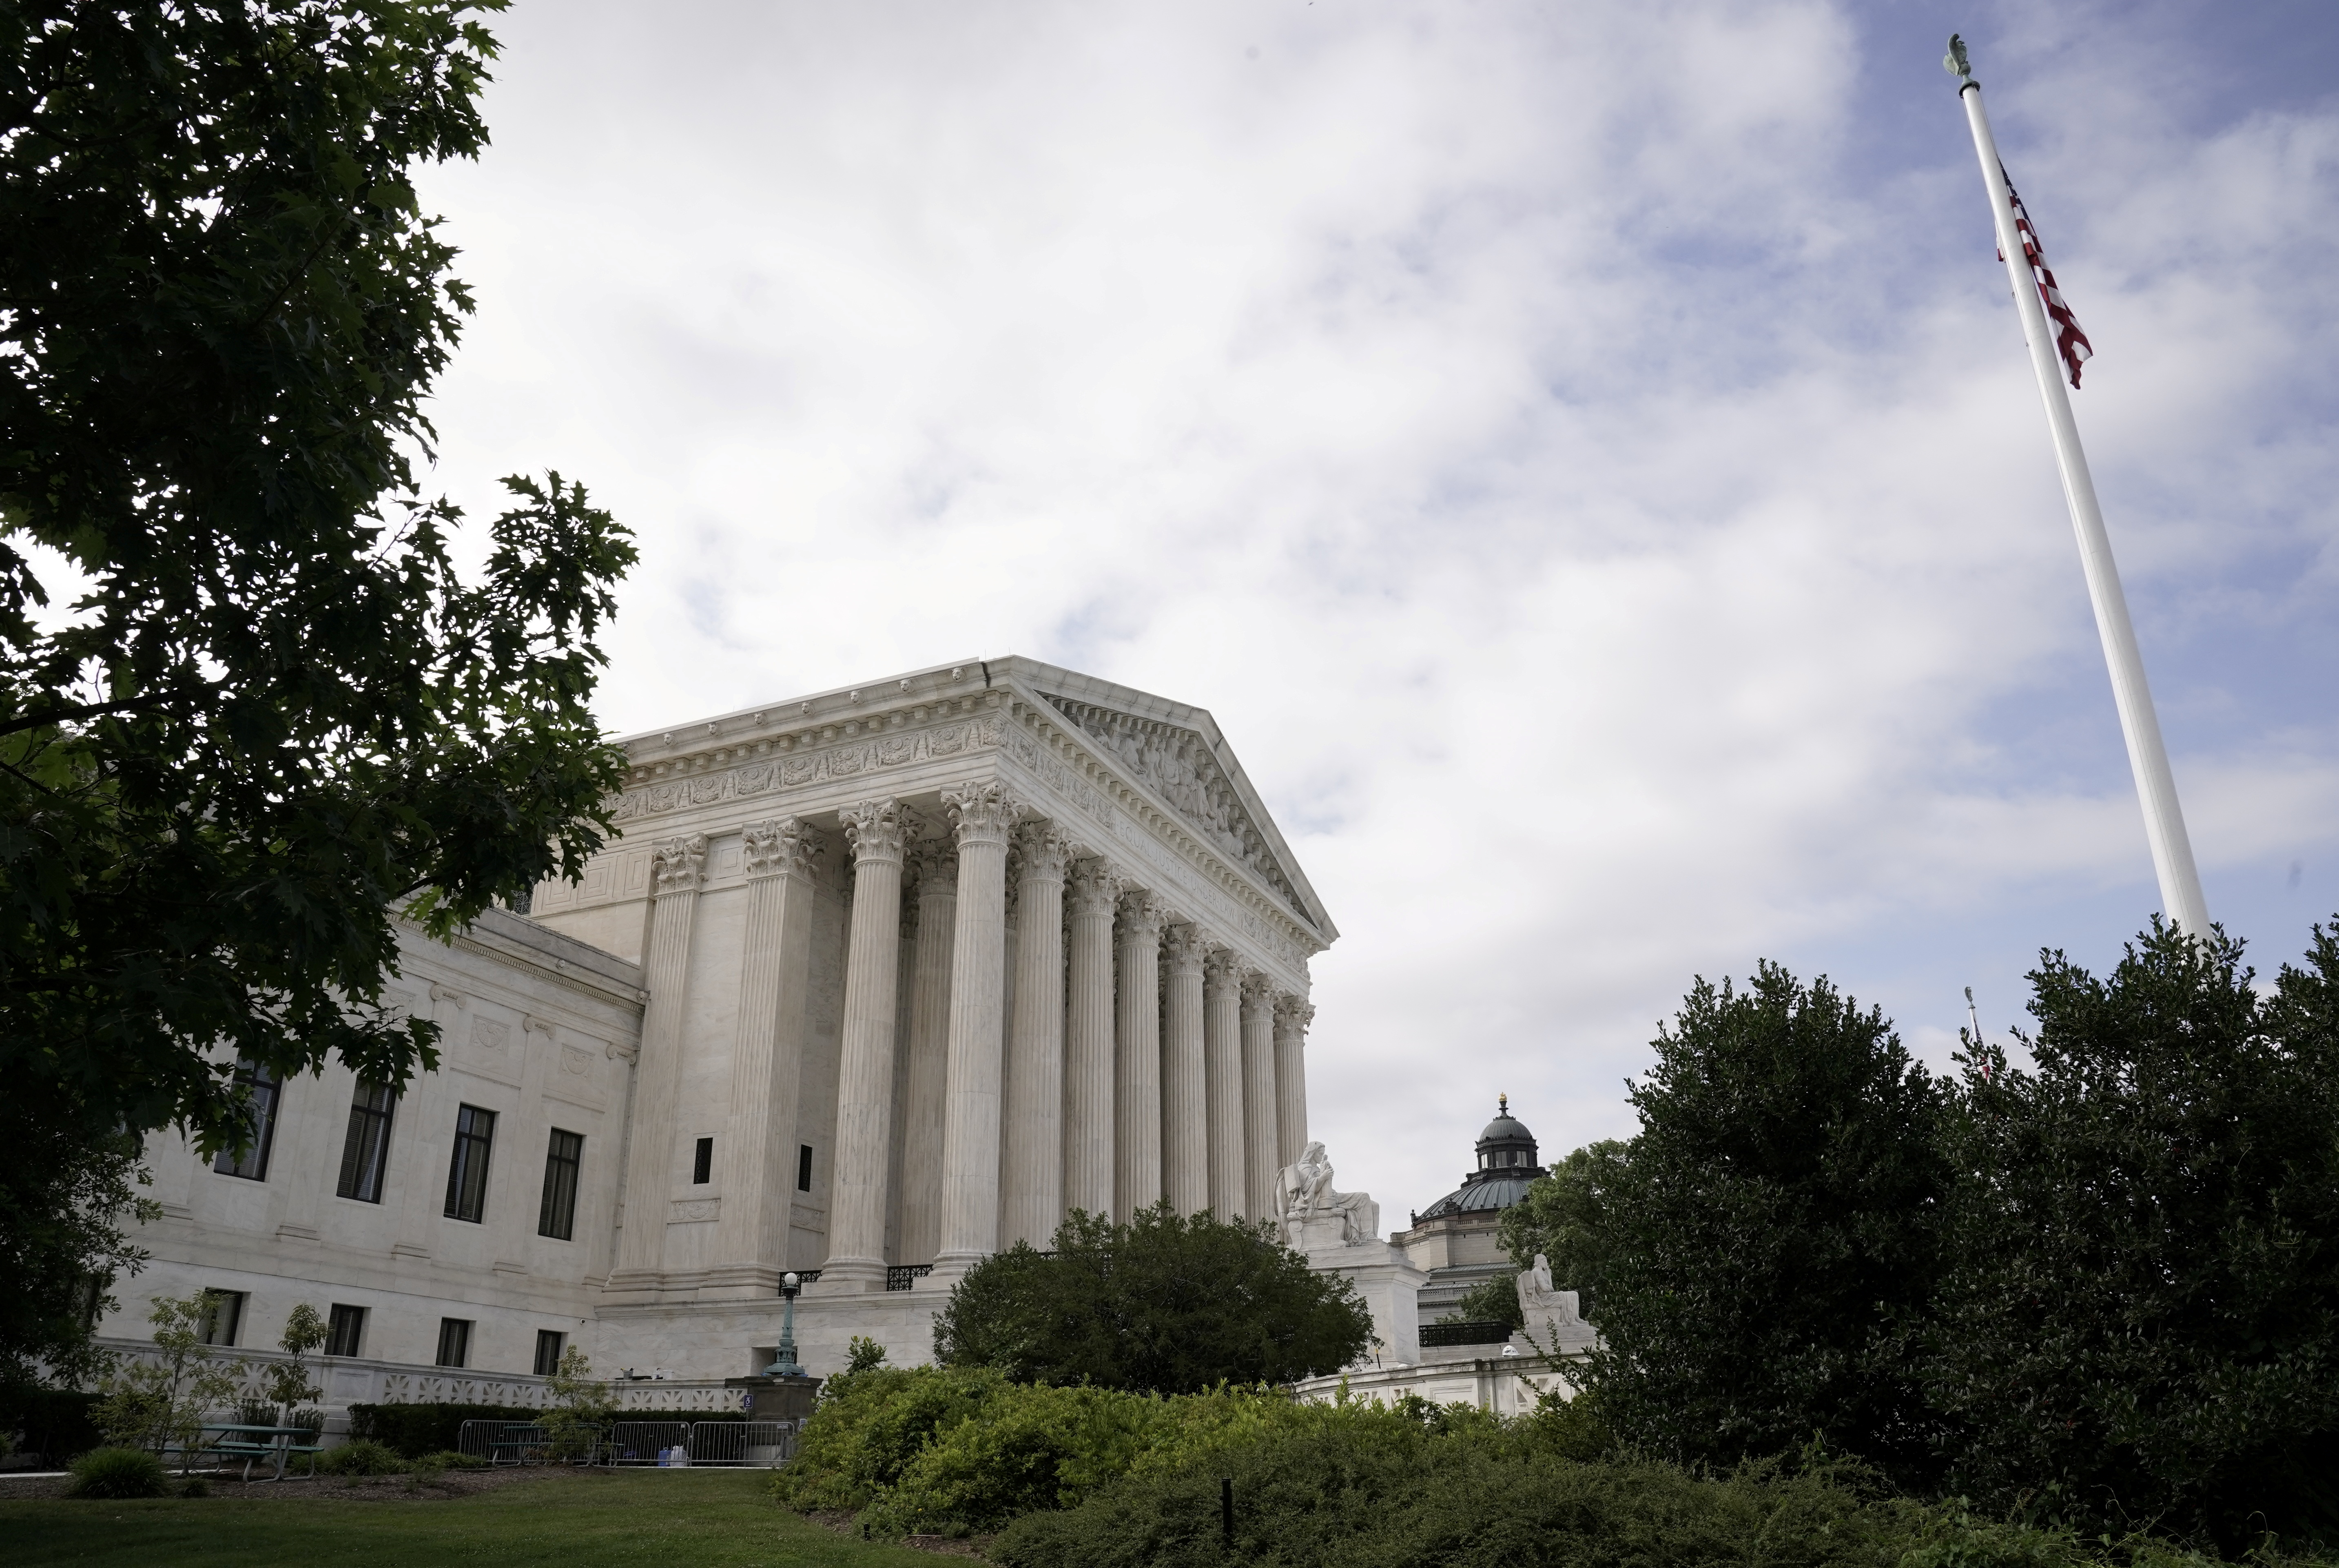 General view of the U.S. Supreme Court building in Washington